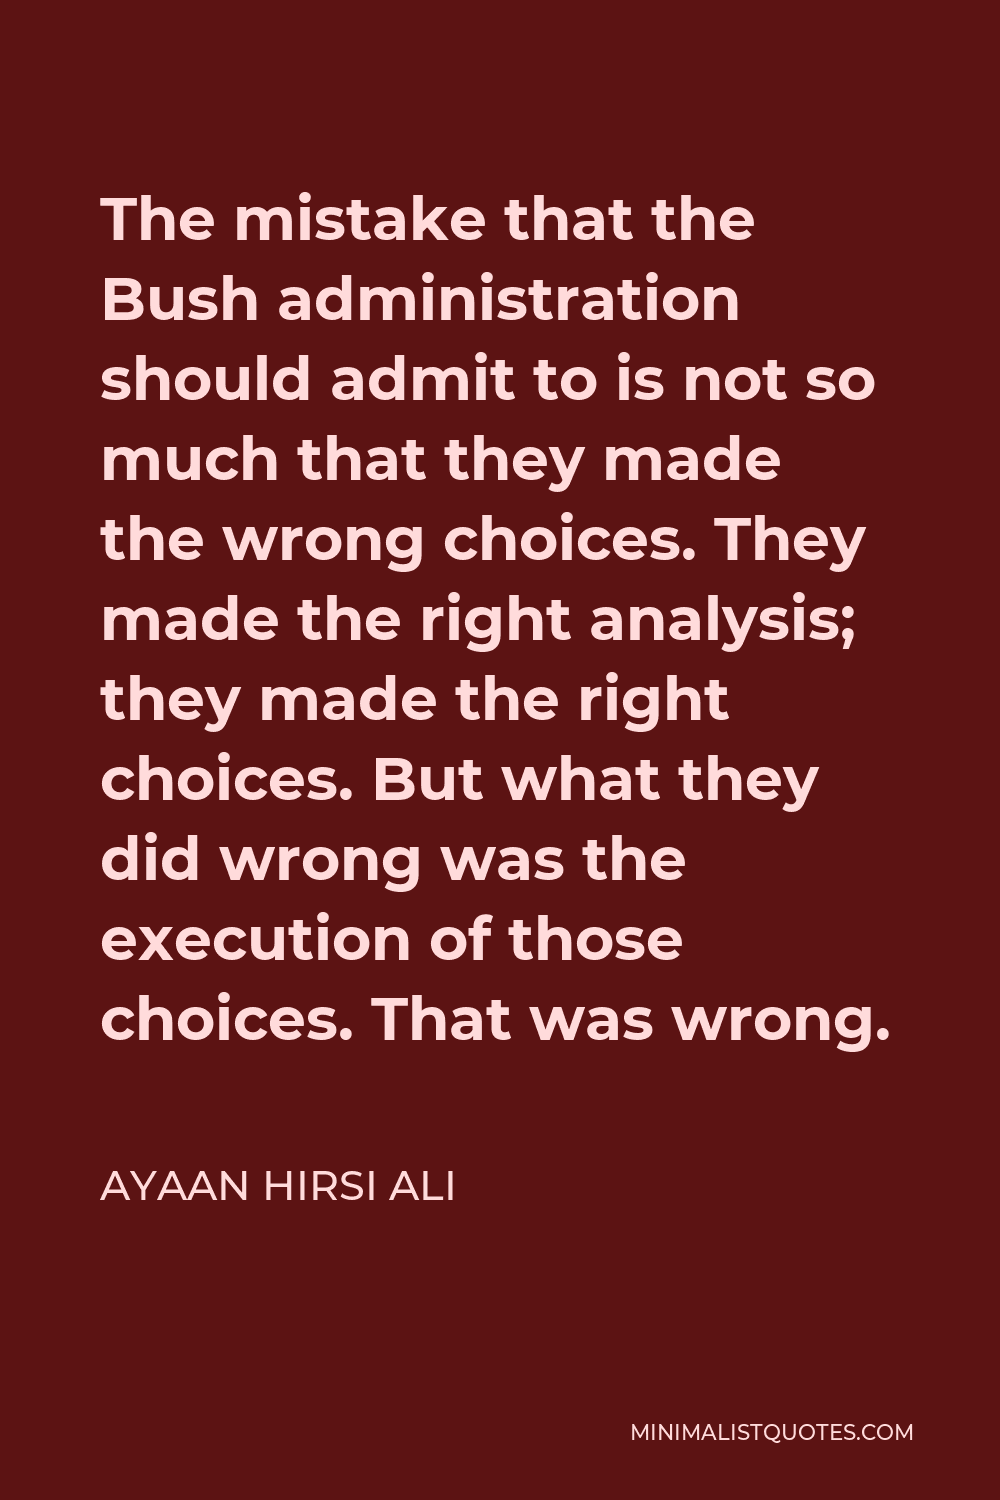 Ayaan Hirsi Ali Quote - The mistake that the Bush administration should admit to is not so much that they made the wrong choices. They made the right analysis; they made the right choices. But what they did wrong was the execution of those choices. That was wrong.